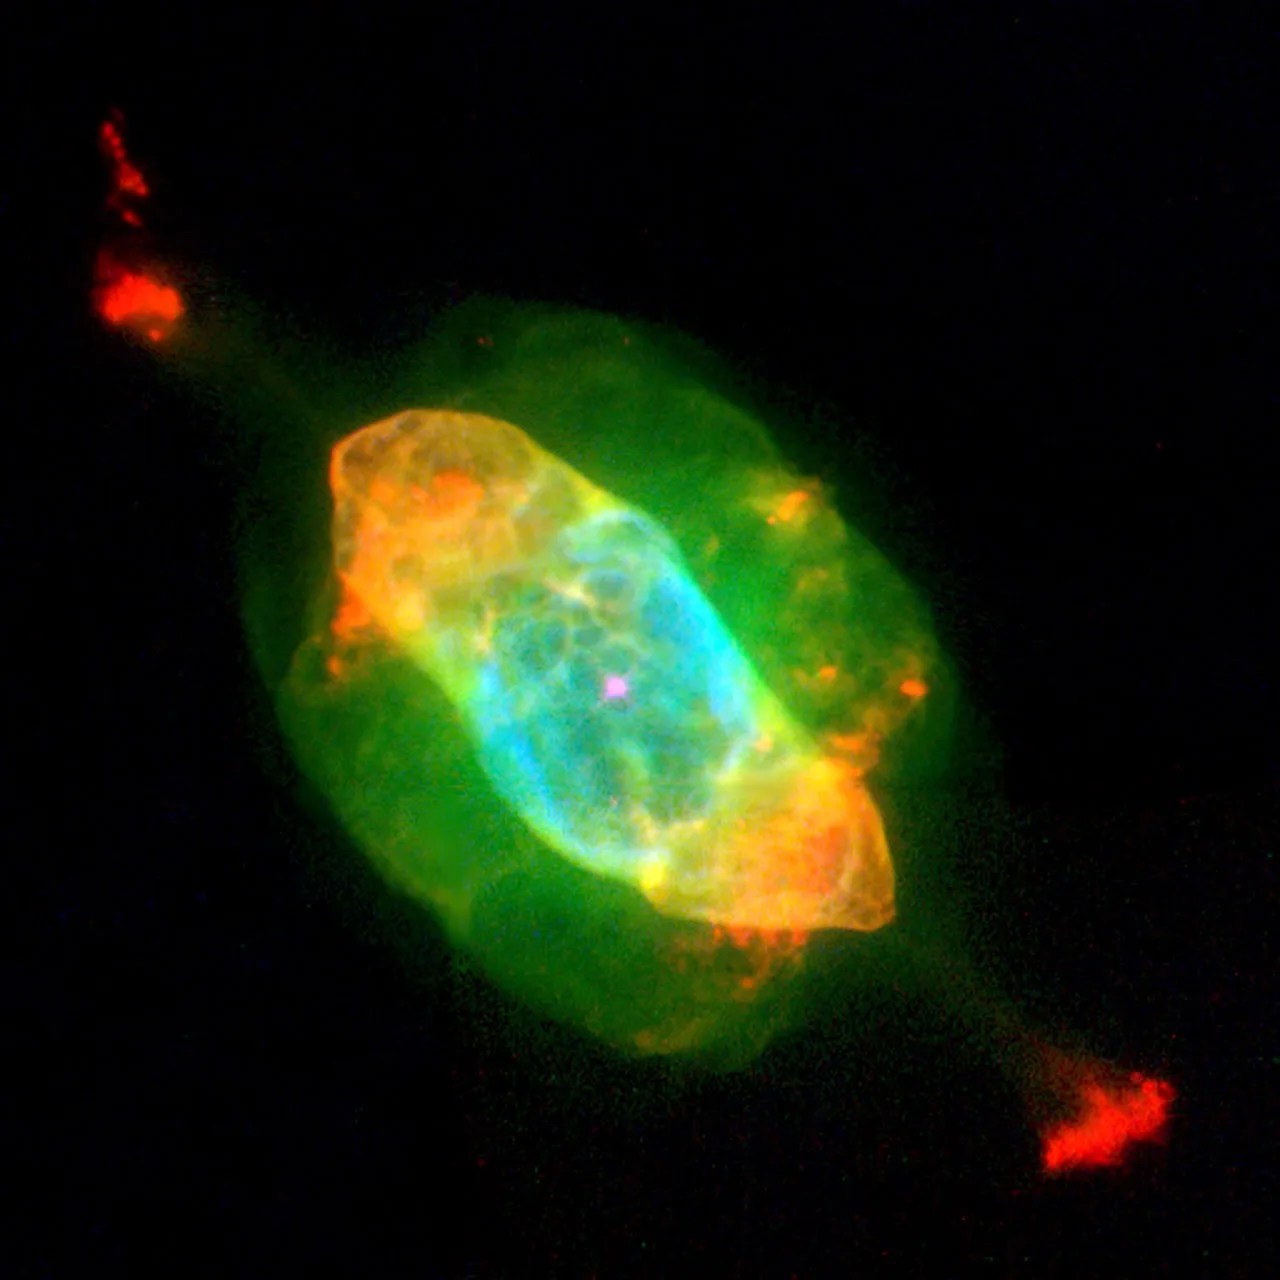 A bright pink central star is surrounded by a football-shaped rim of dense blue and red gas. The cavity and its rim are trapped inside smoothly-distributed greenish material in the shape of a barrel and comprised of the star's former outer layers. At larger distances, and lying along the long axis of the nebula, a pair of red "ansae", or "handles" appears. Each ansa is joined to the tips of the cavity by a long greenish jet of material.